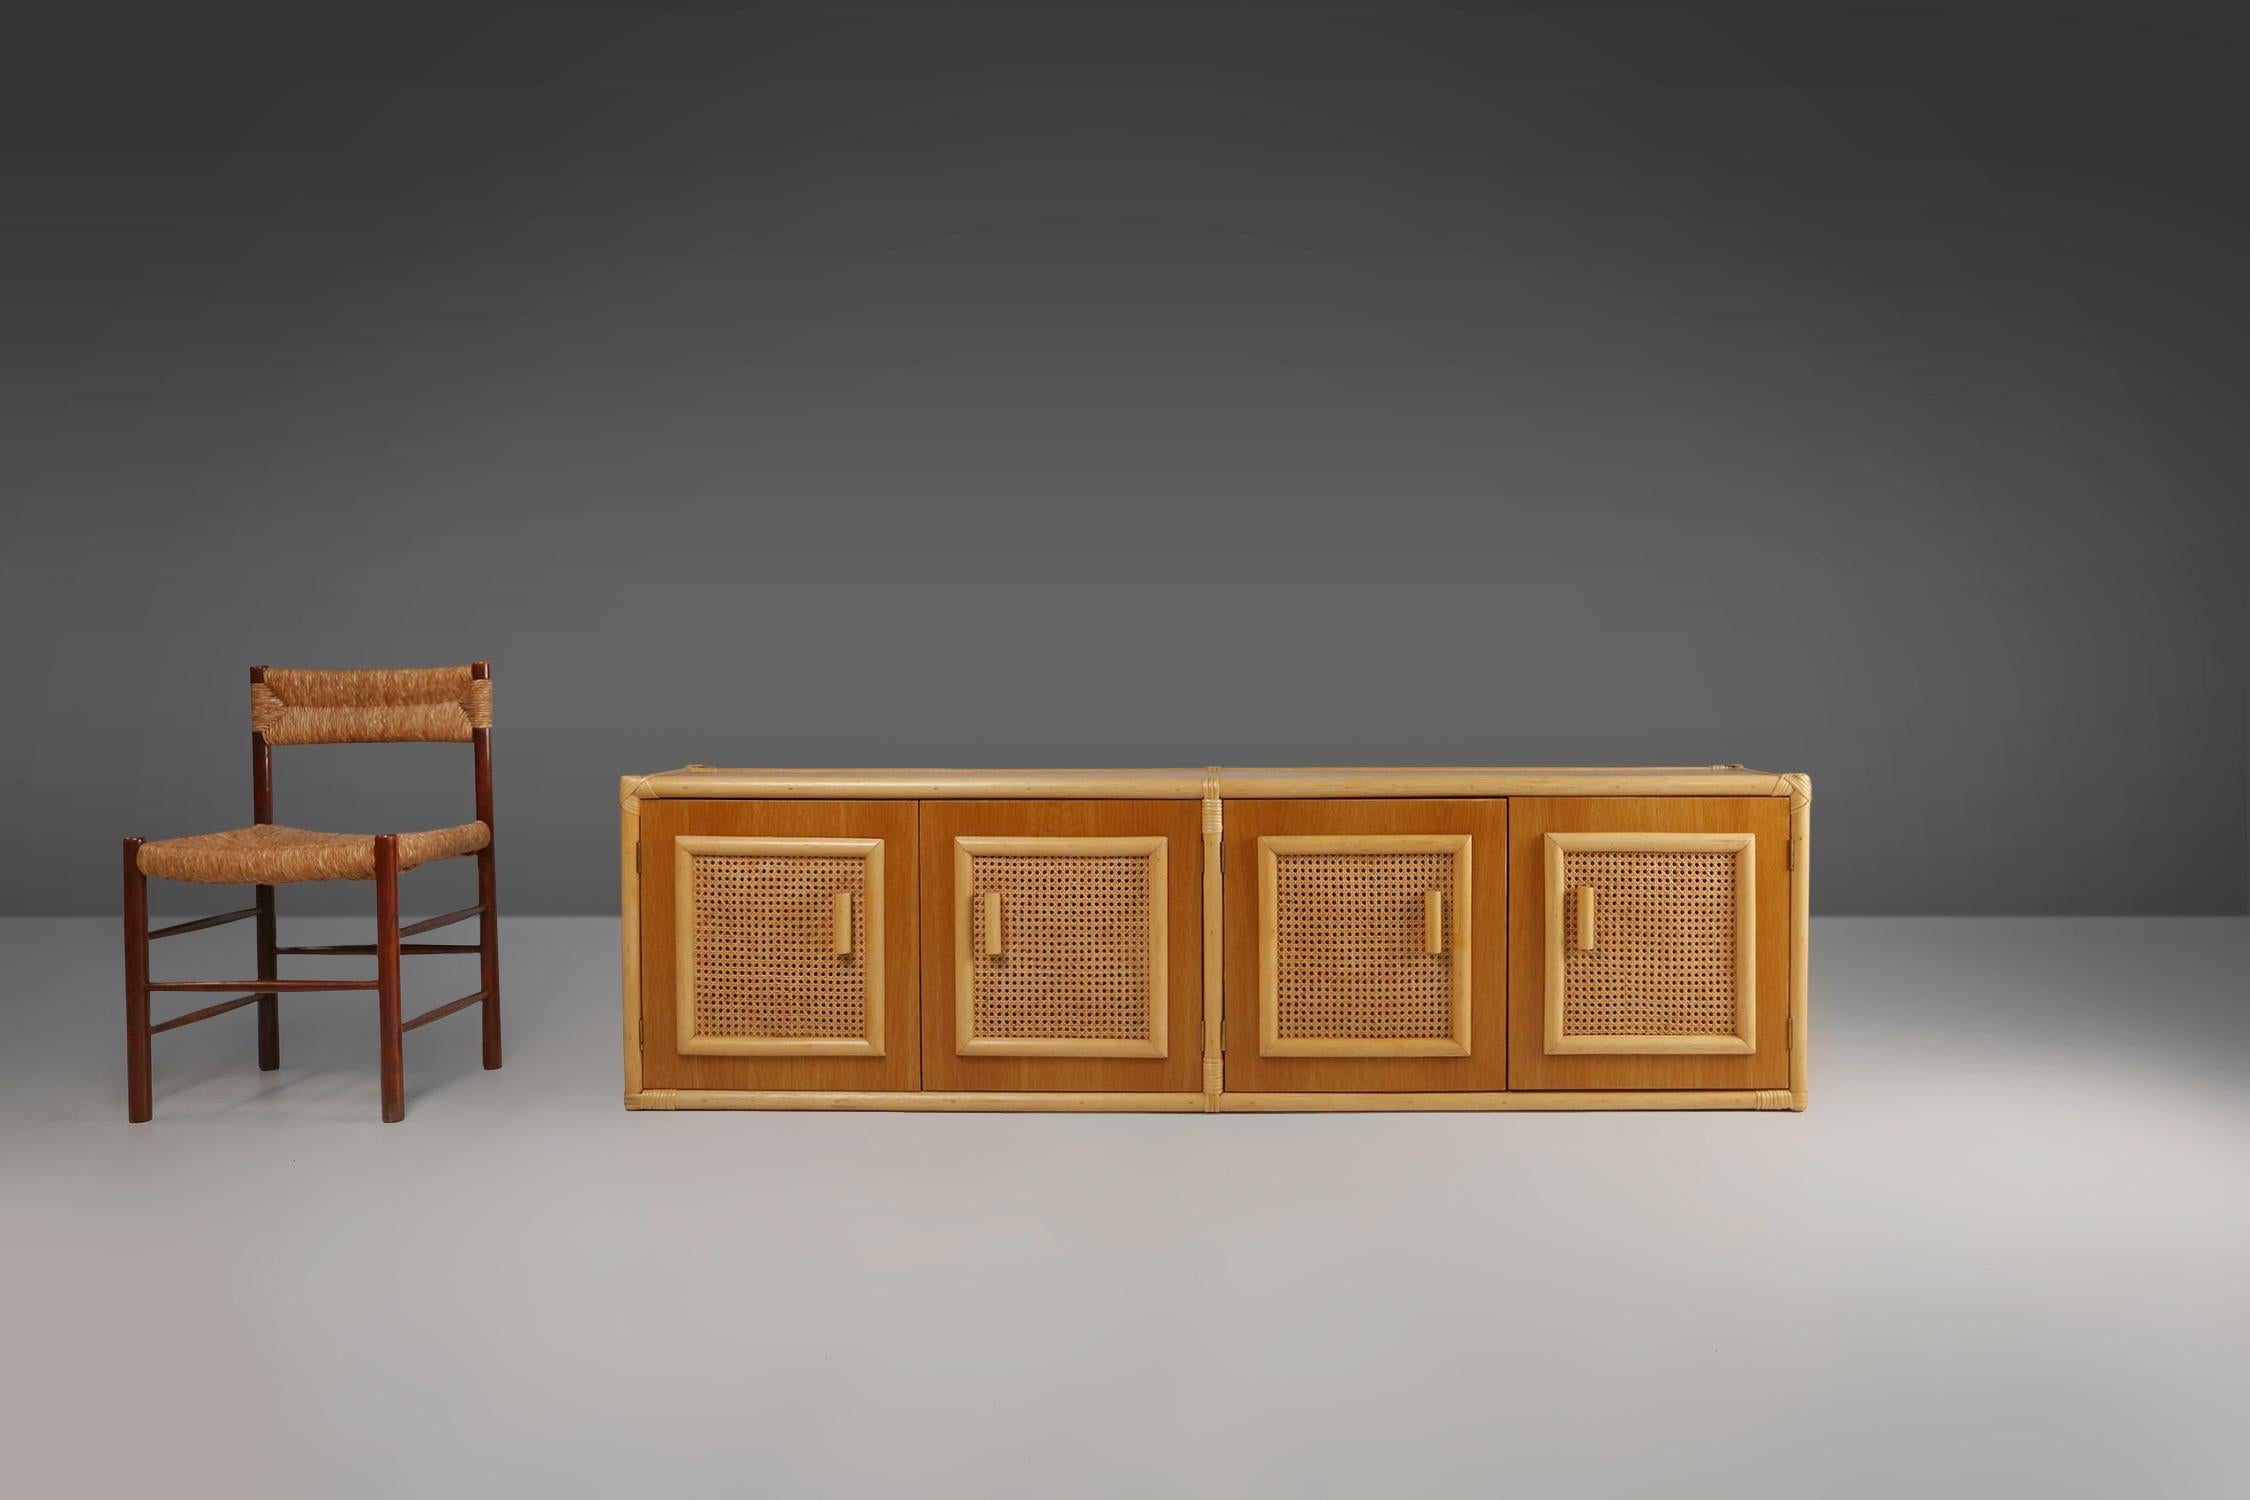 France / 1960s / sideboard / rattan and wood / mid-century / vintage / design

A rare to find French bohemian style sideboard with 4 rattan doors and  neatly finished back, designed in the sixties. With a beautifully crafted frame and decorative